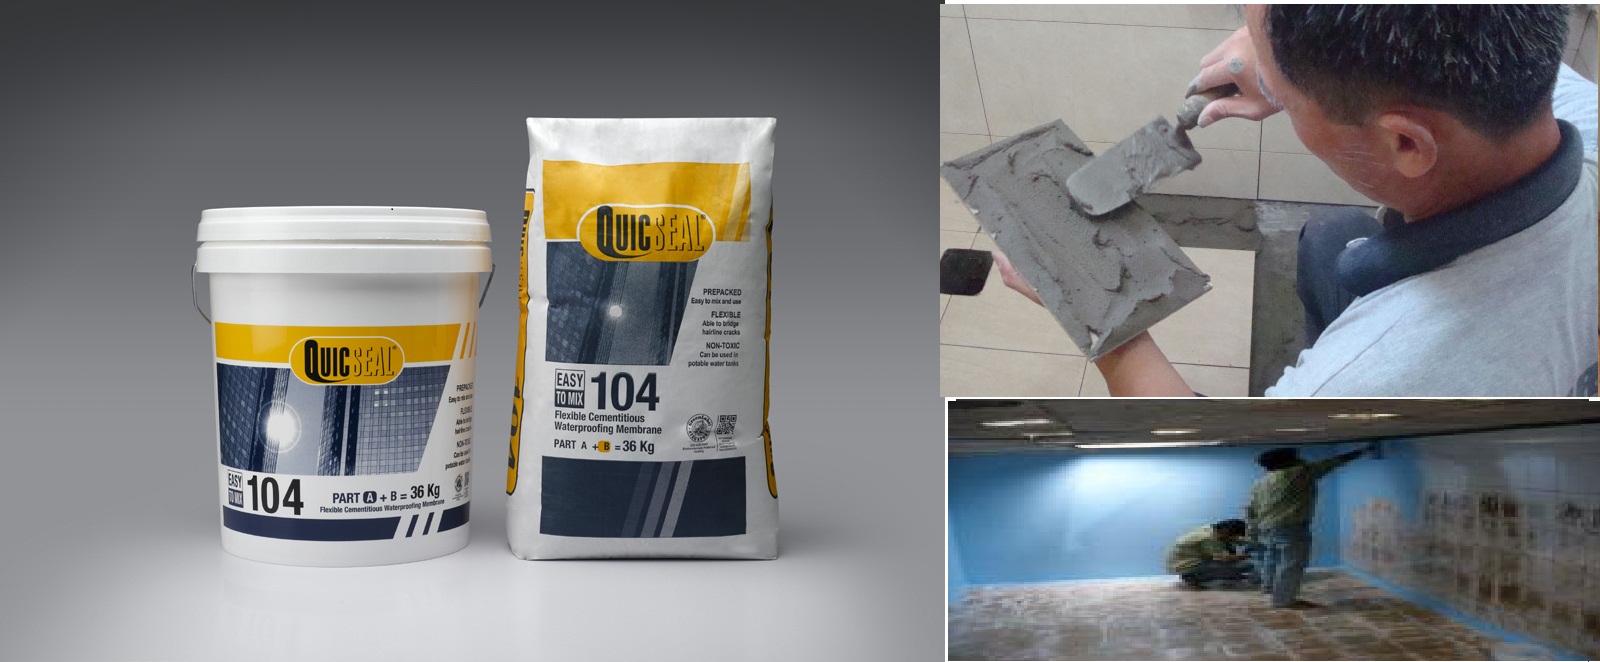 Apartment toilet waterproofing with Quicseal 104s